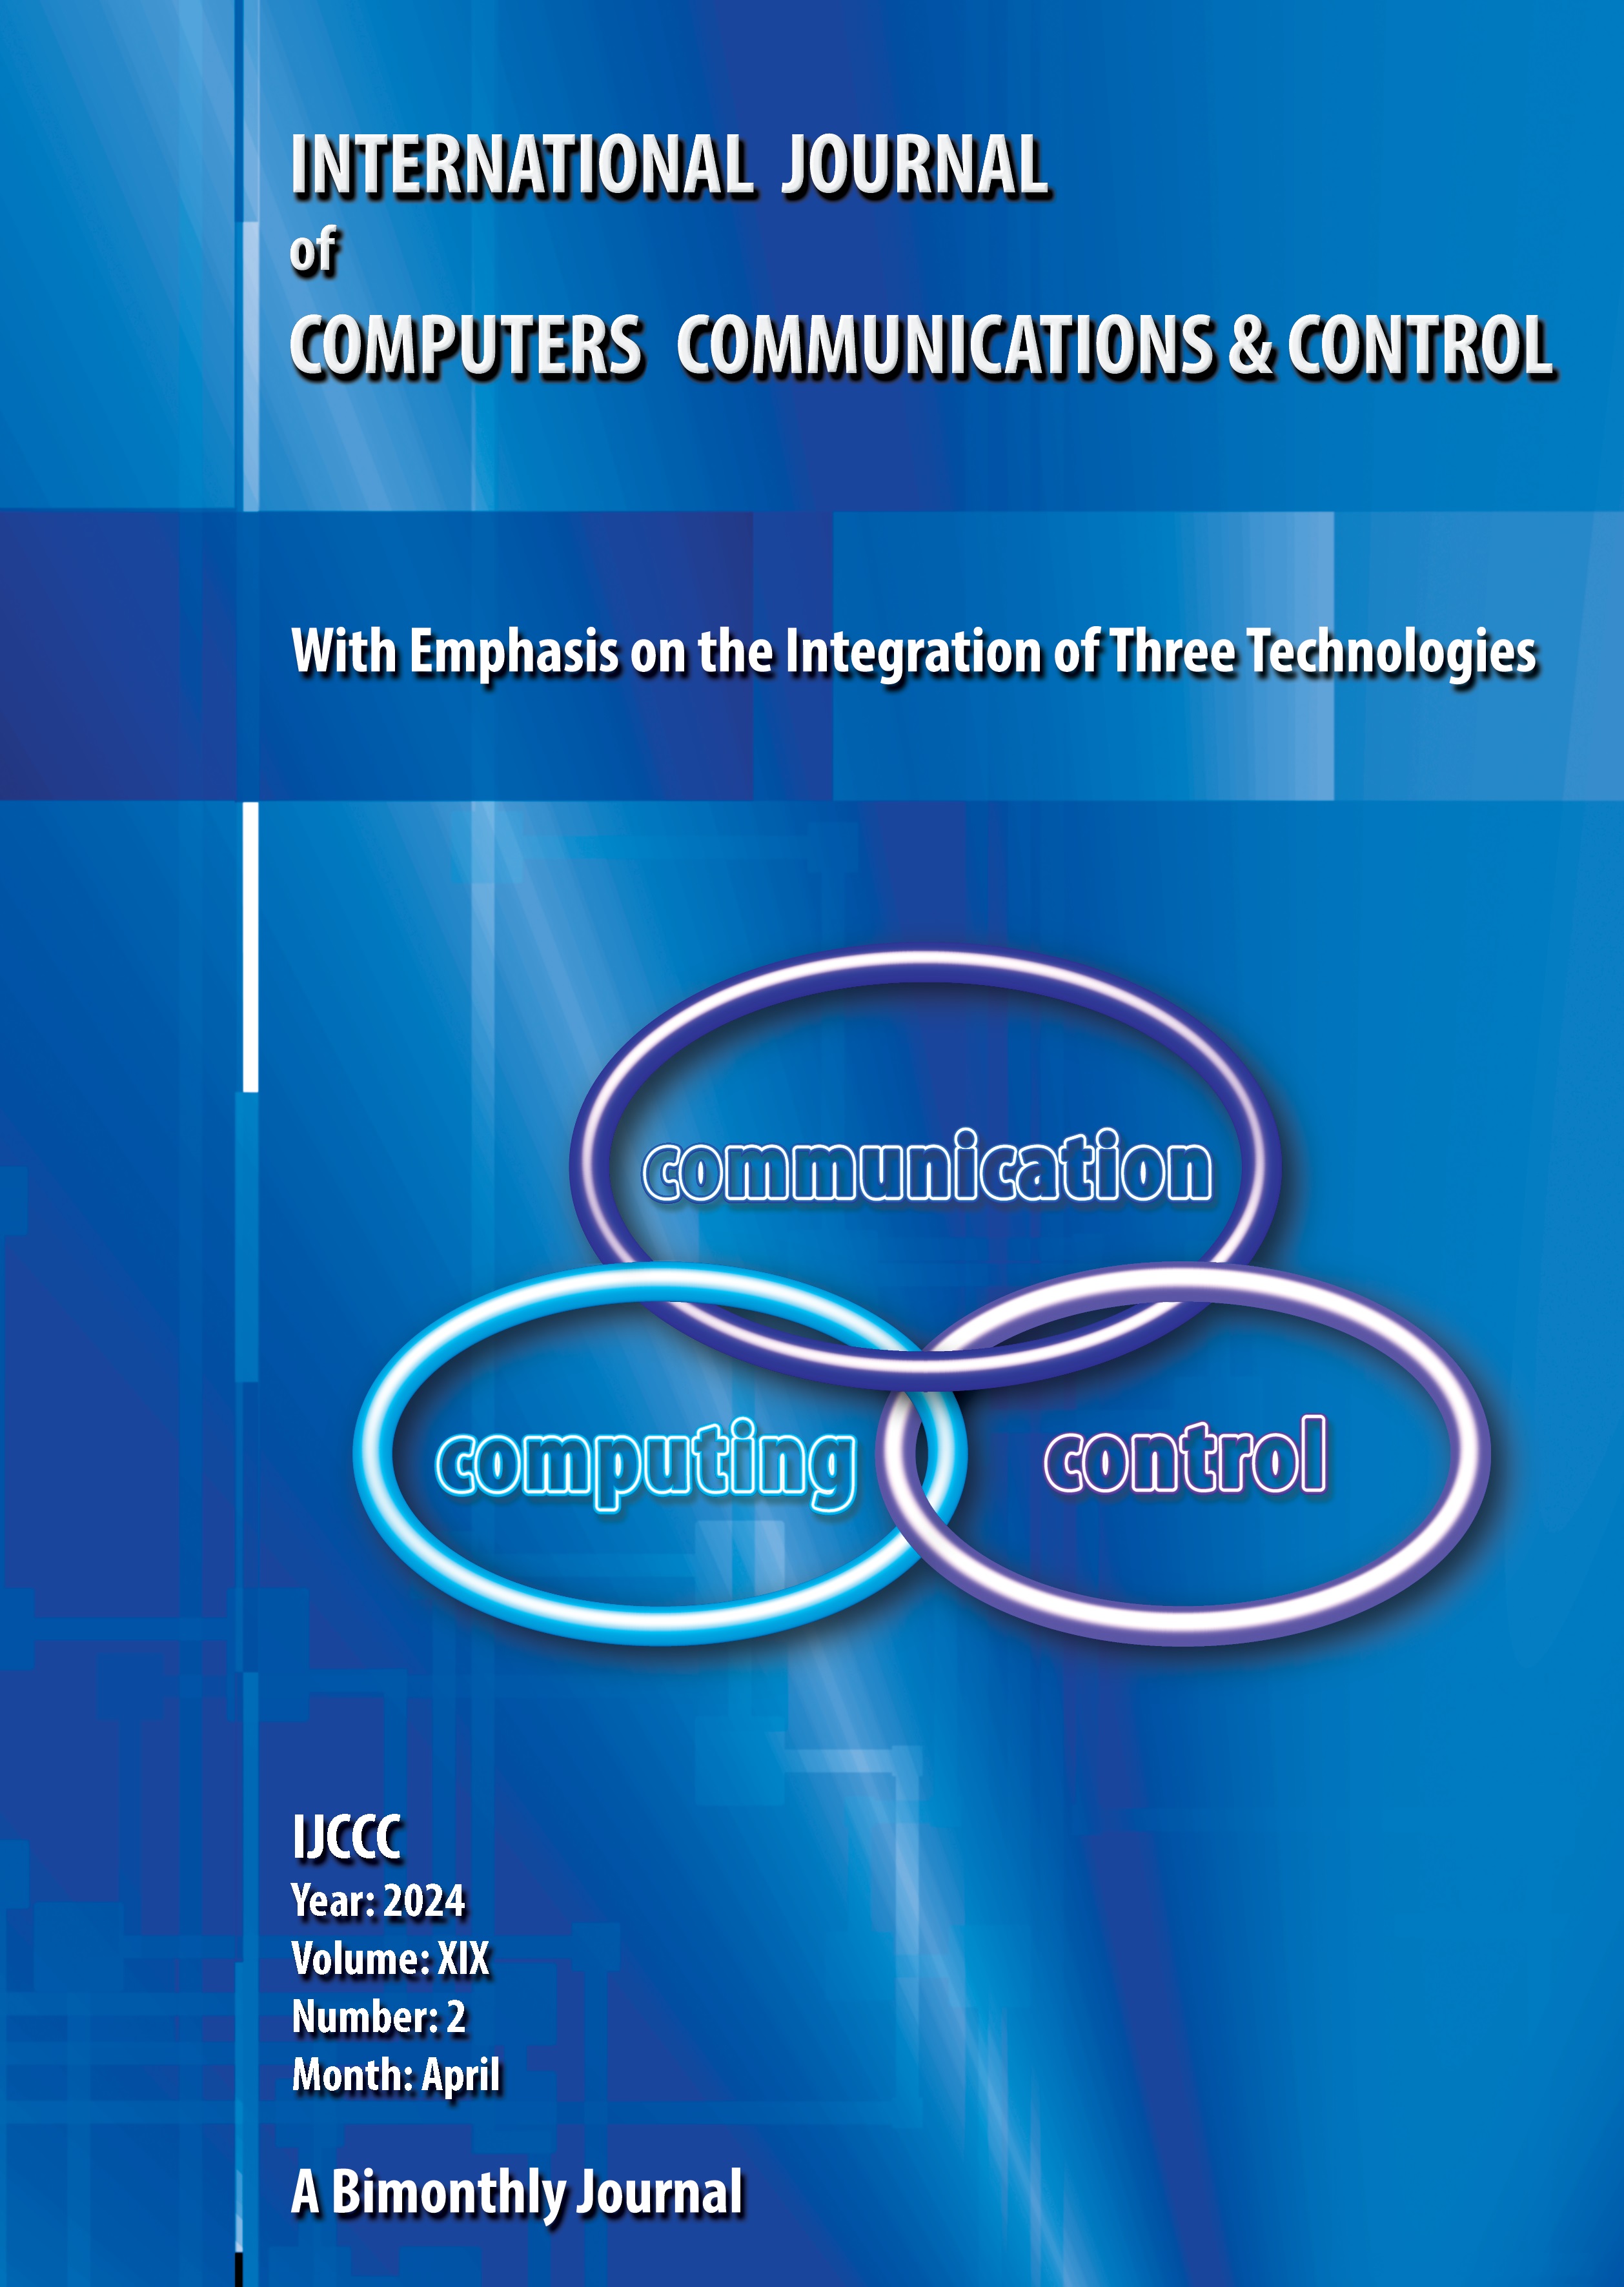 					View Vol. 19 No. 2 (2024): International Journal of Computers Communications & Control (April)
				